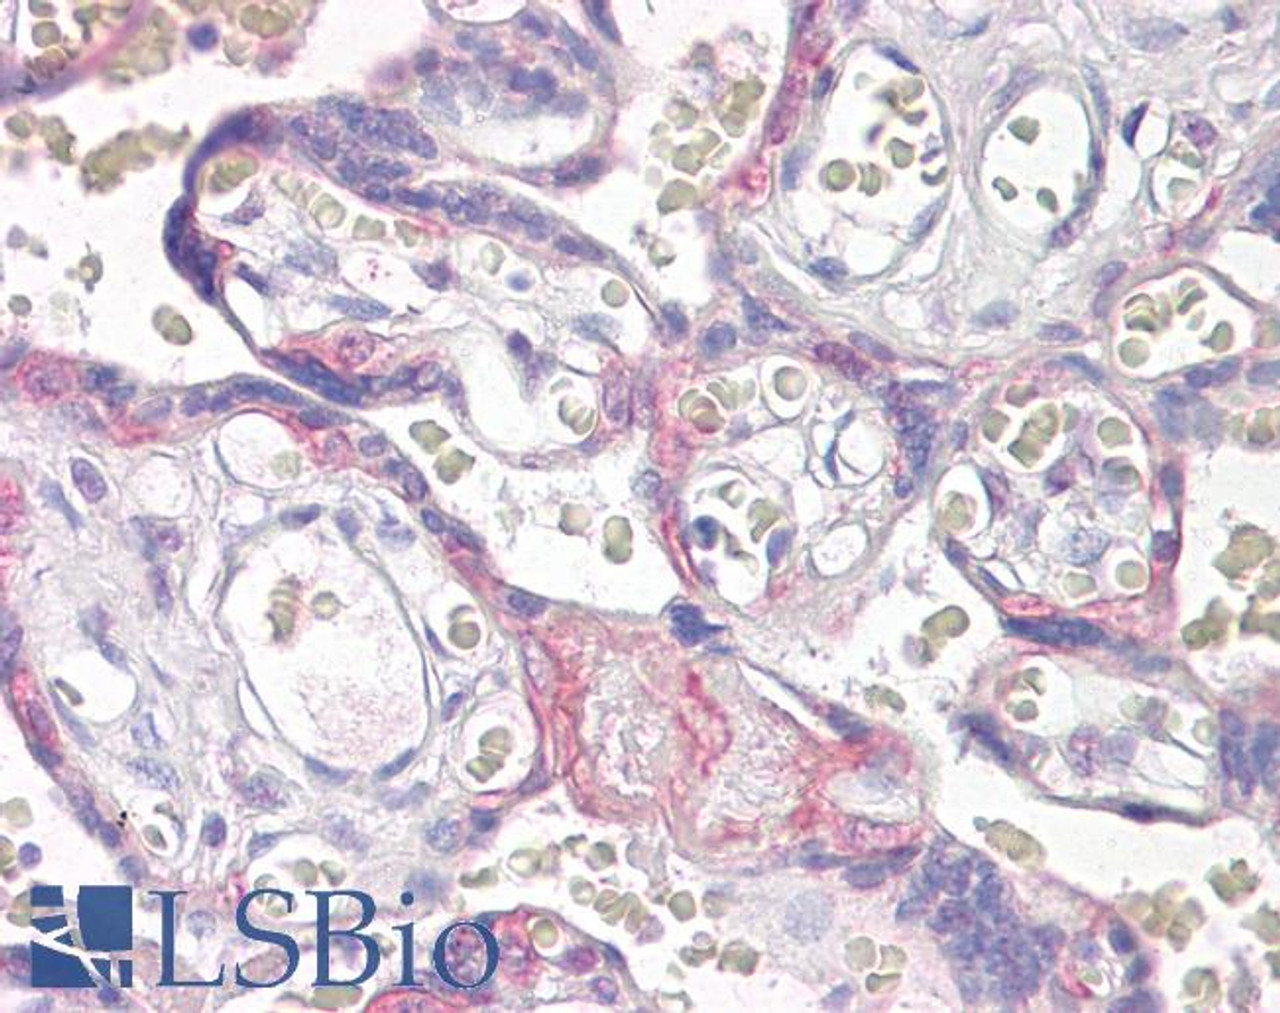 46-586 (4ug/ml) staining of paraffin embedded Human Kidney. Steamed antigen retrieval with citrate buffer pH 6, HRP-staining. Similar results were obtained after antigen retrieval at pH9.